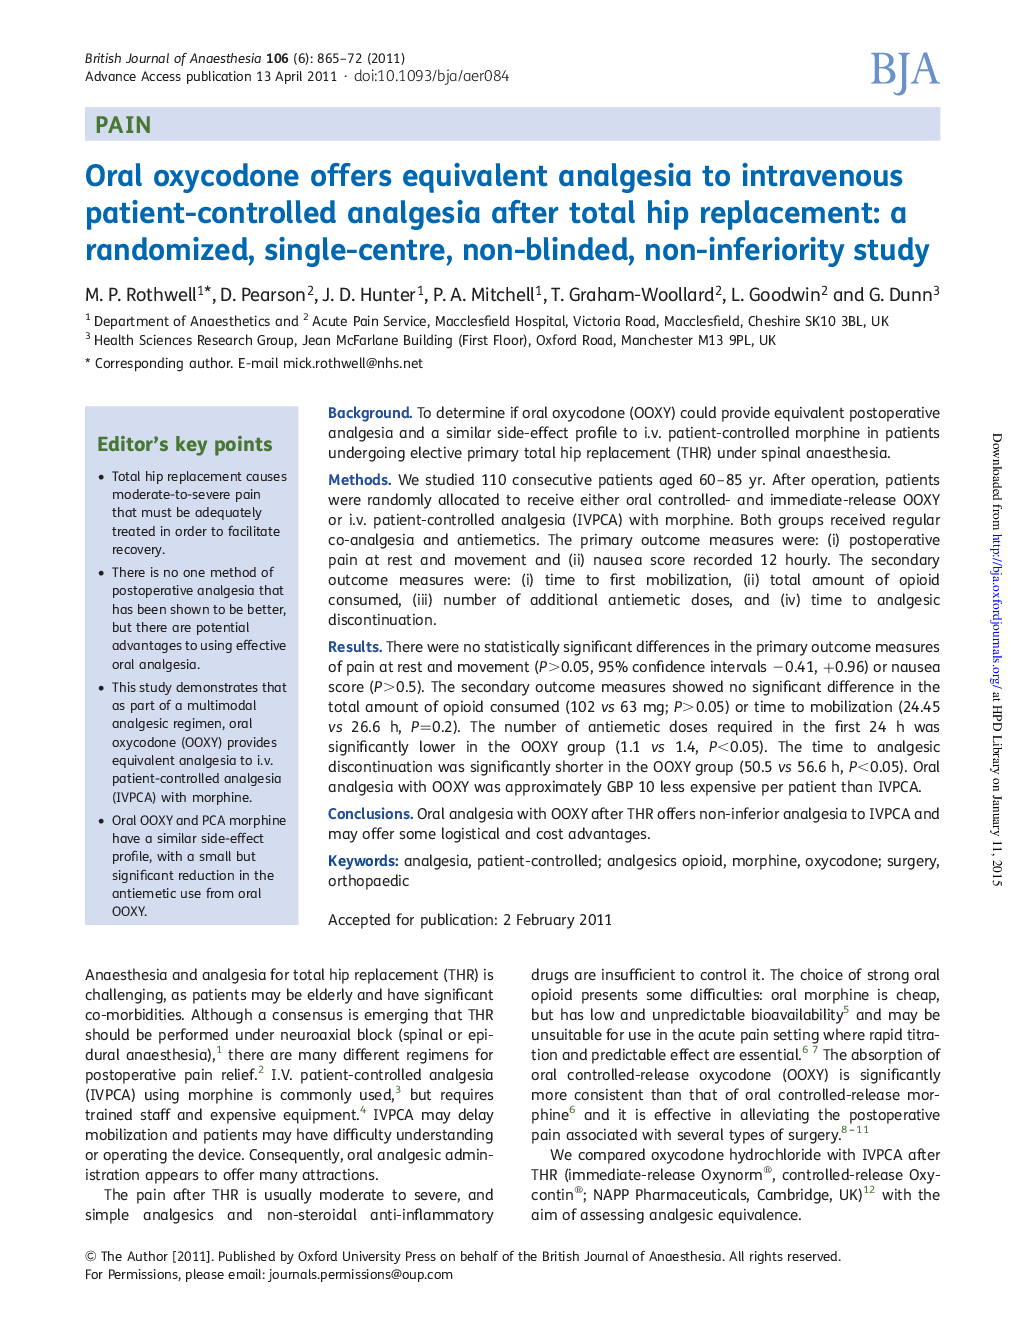 Oral oxycodone offers equivalent analgesia to intravenous patient-controlled analgesia after total hip replacement: a randomized, single-centre, non-blinded, non-inferiority study